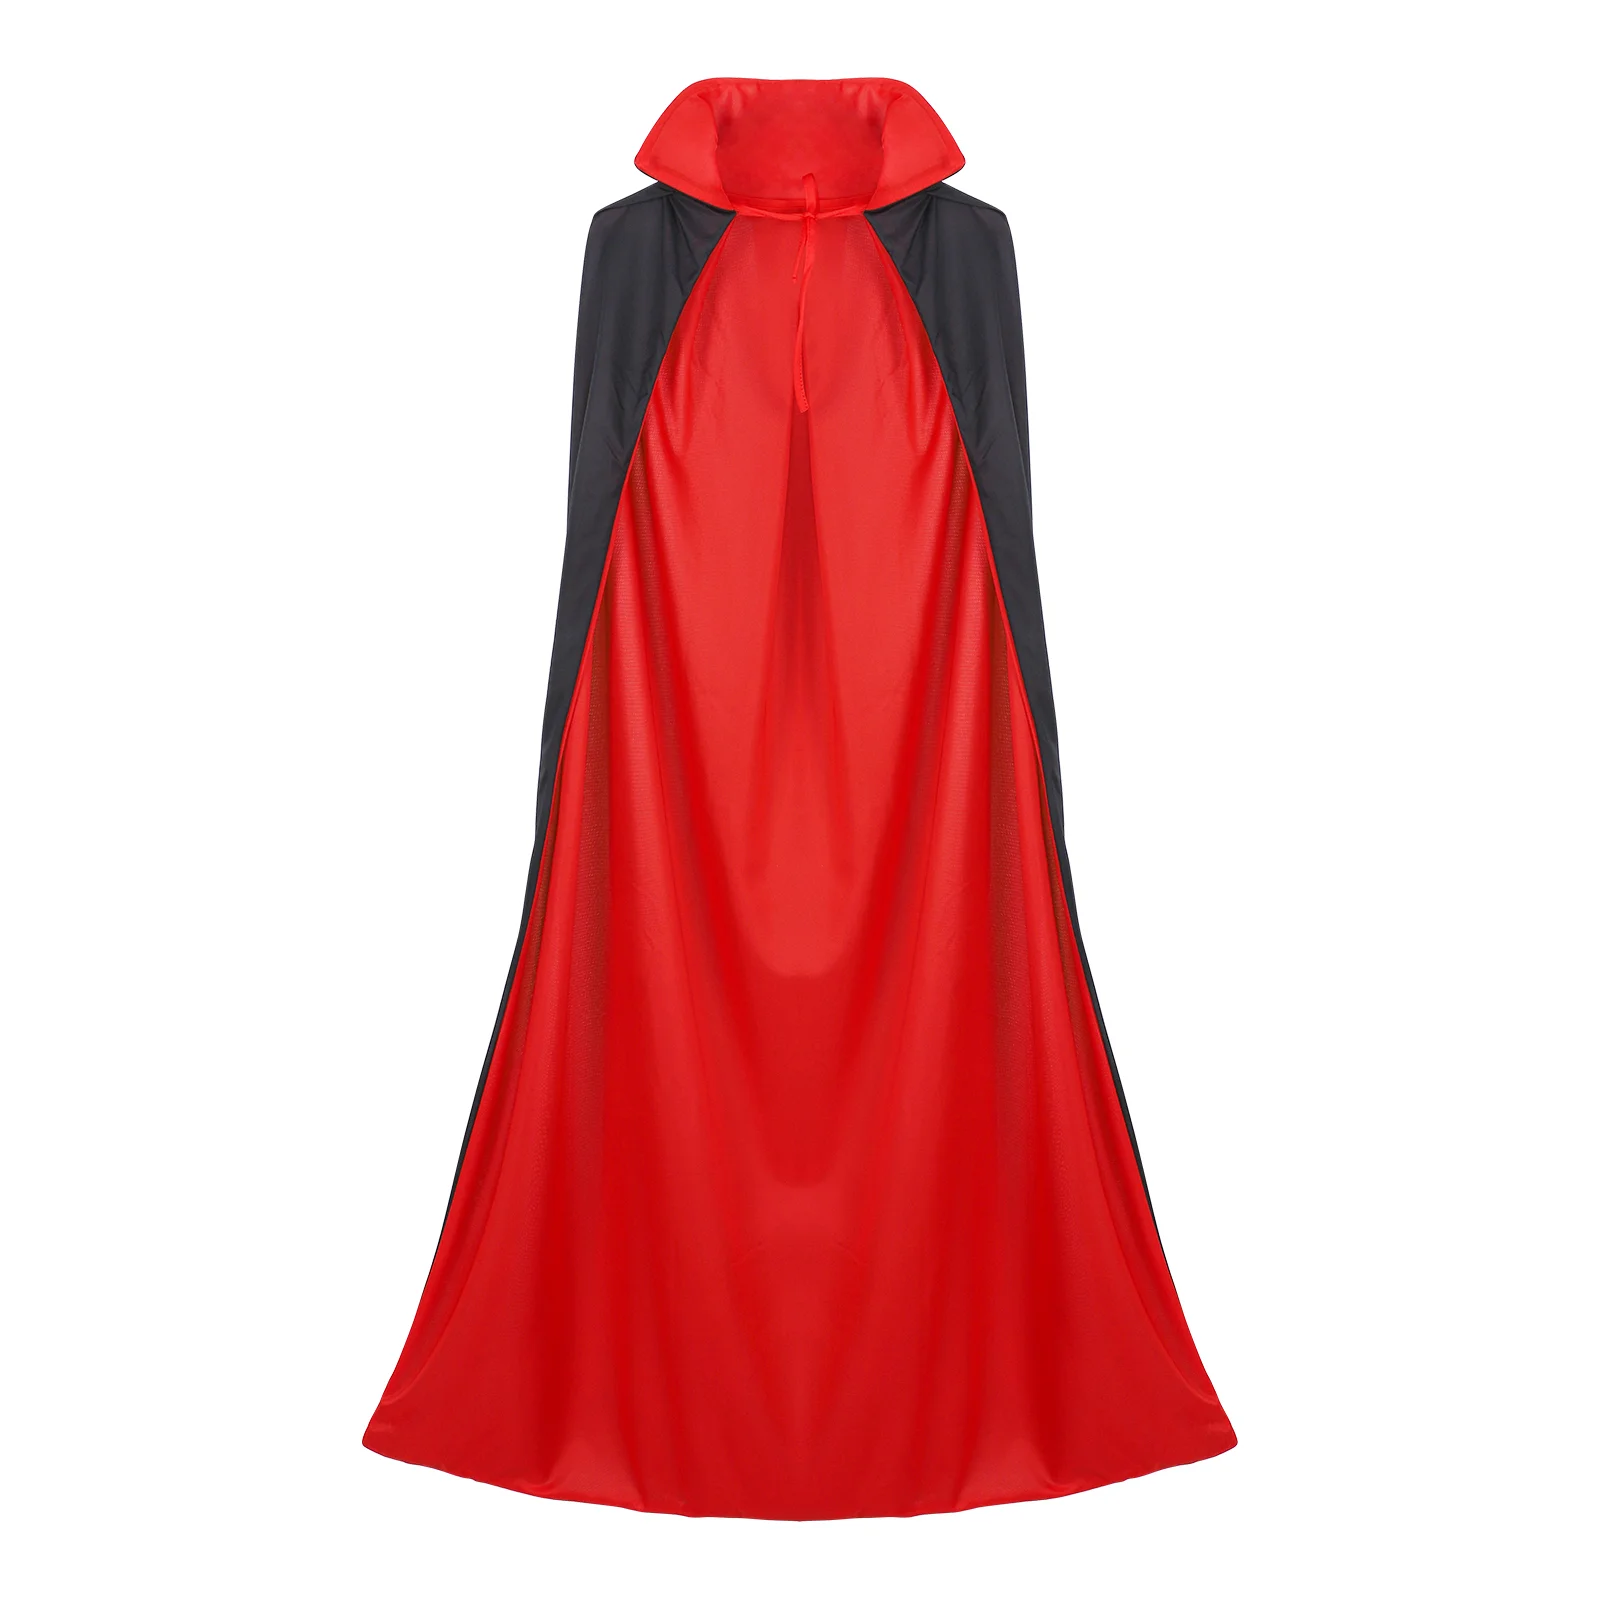 

1pc Halloween Cosplay Cape Vampire Costume Accessories Masquerade Party Cloak Adults Cape Prop For women Witch